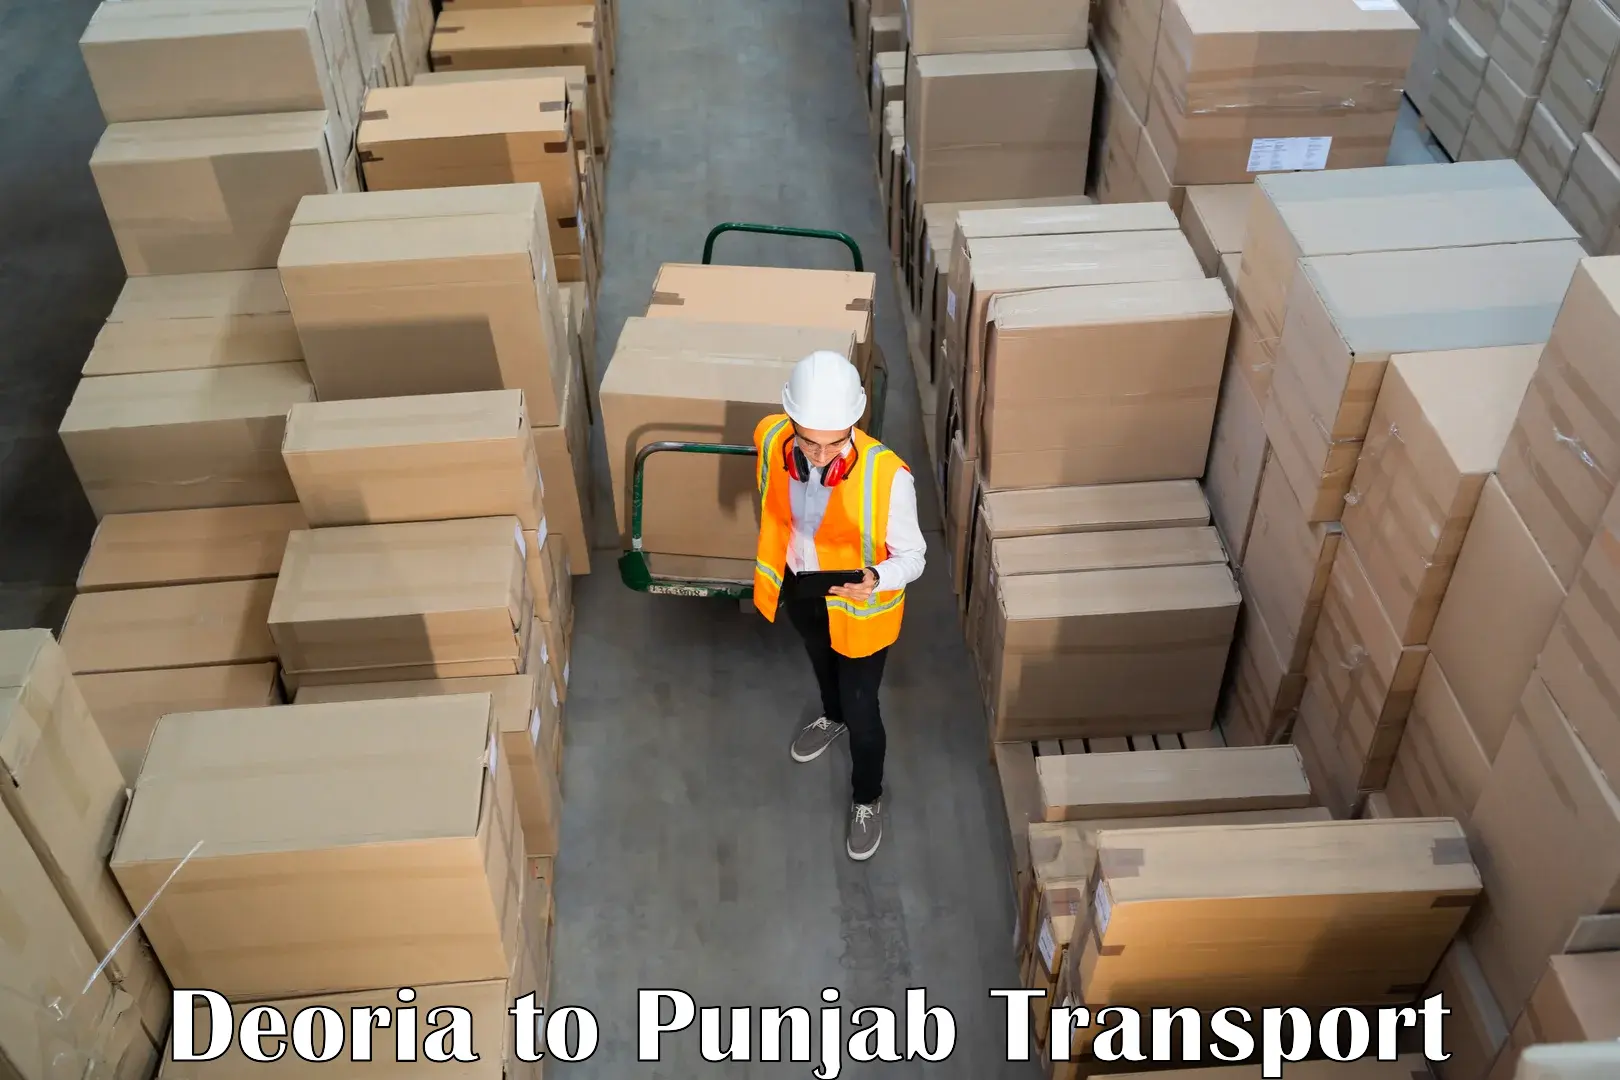 Express transport services in Deoria to Punjab